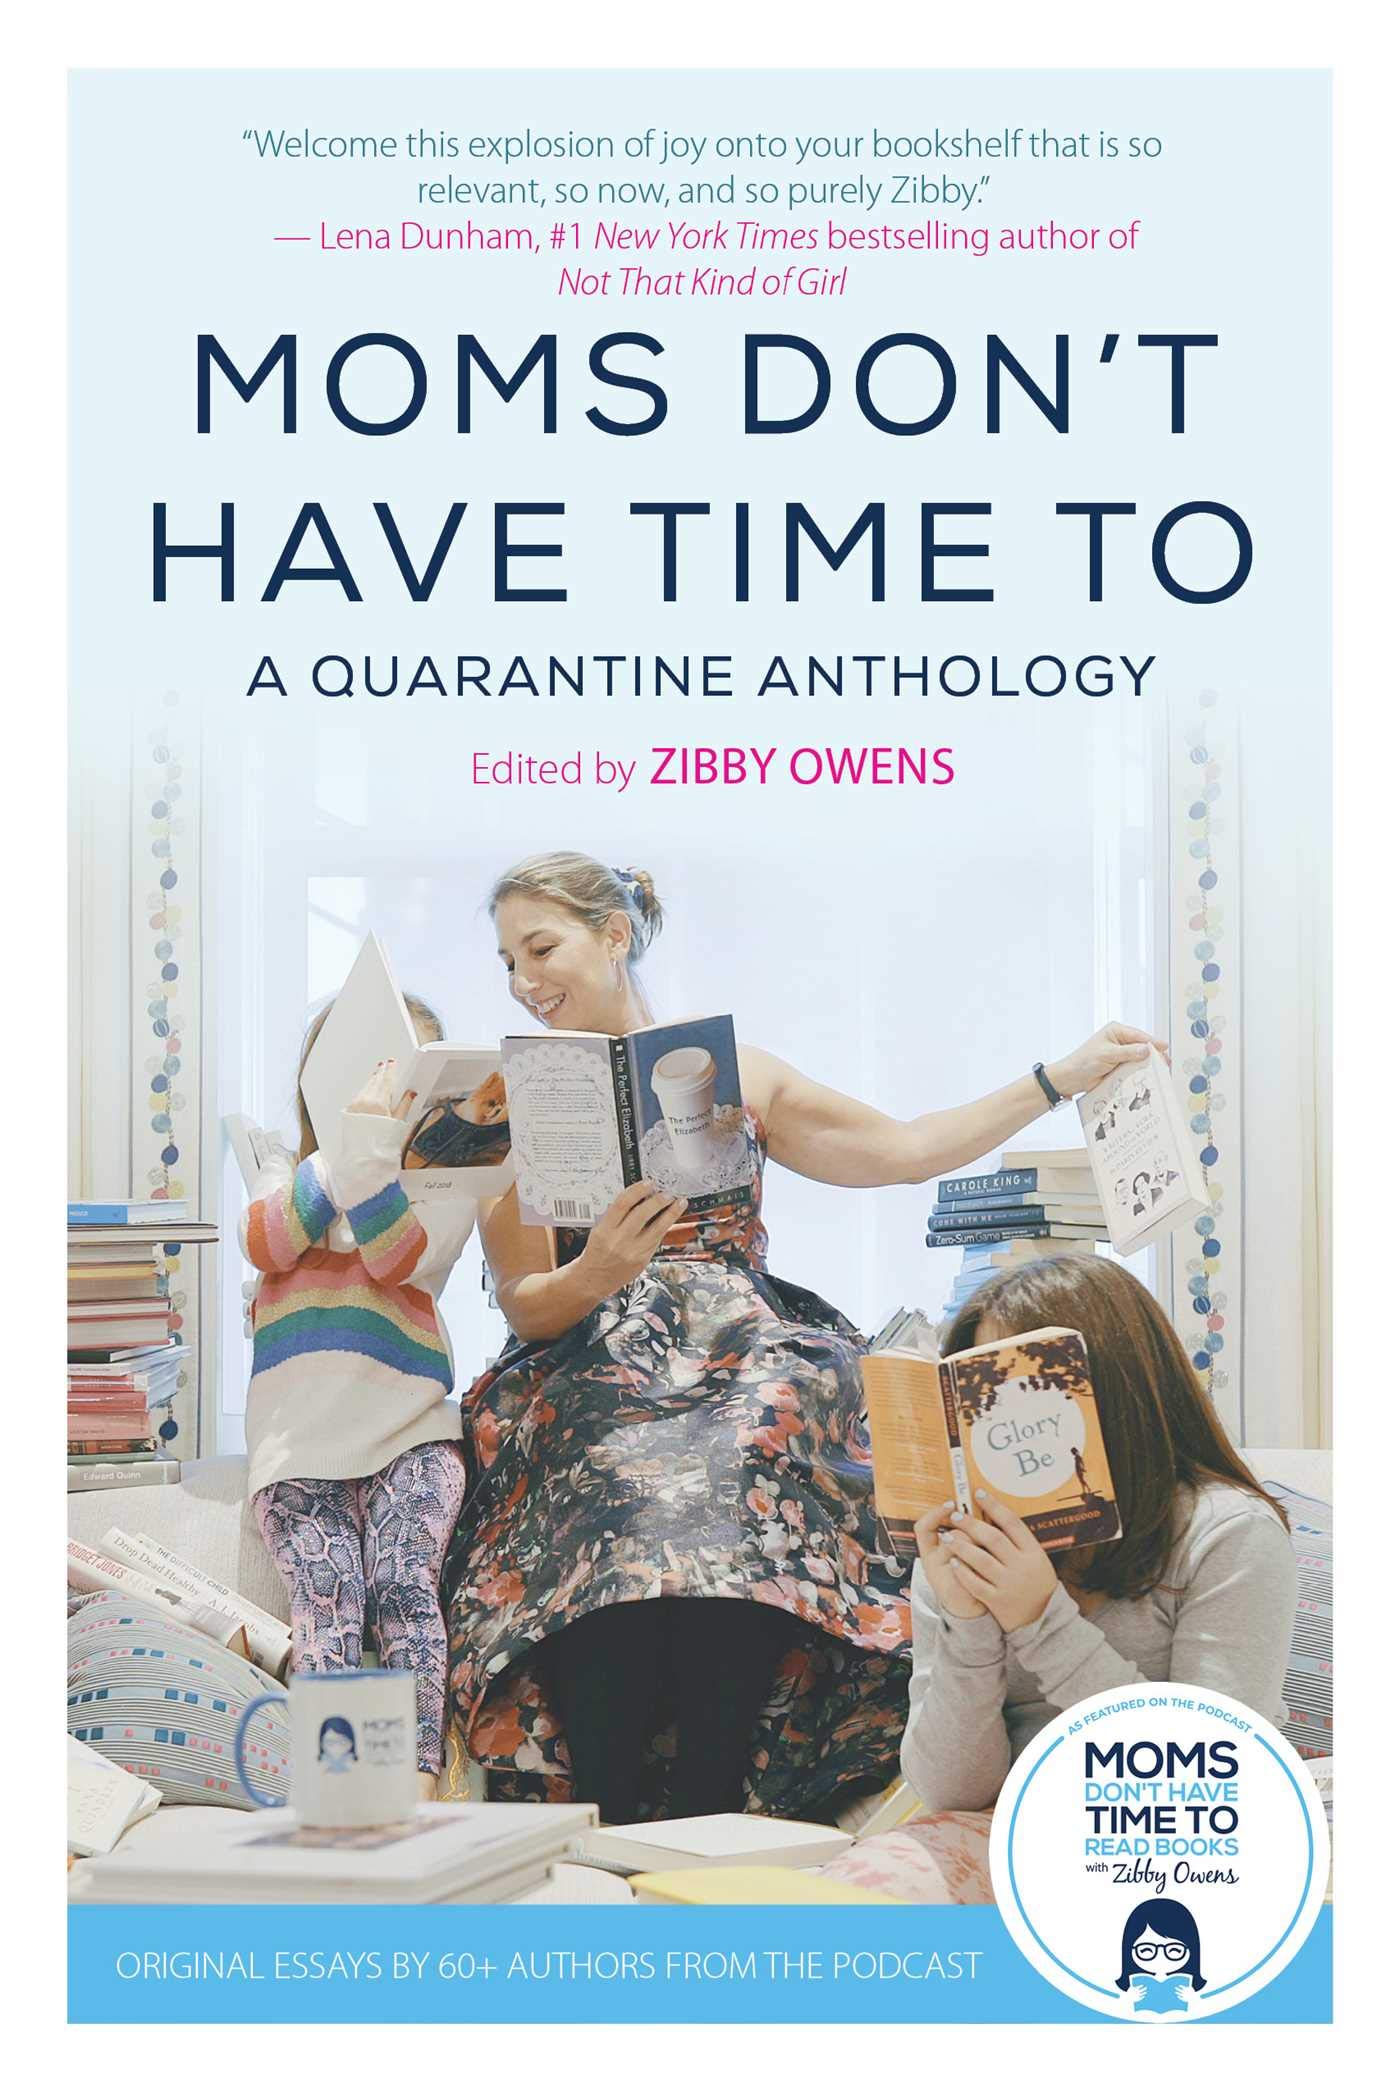 Moms Don’t Have Time to: A Quarantine Anthology